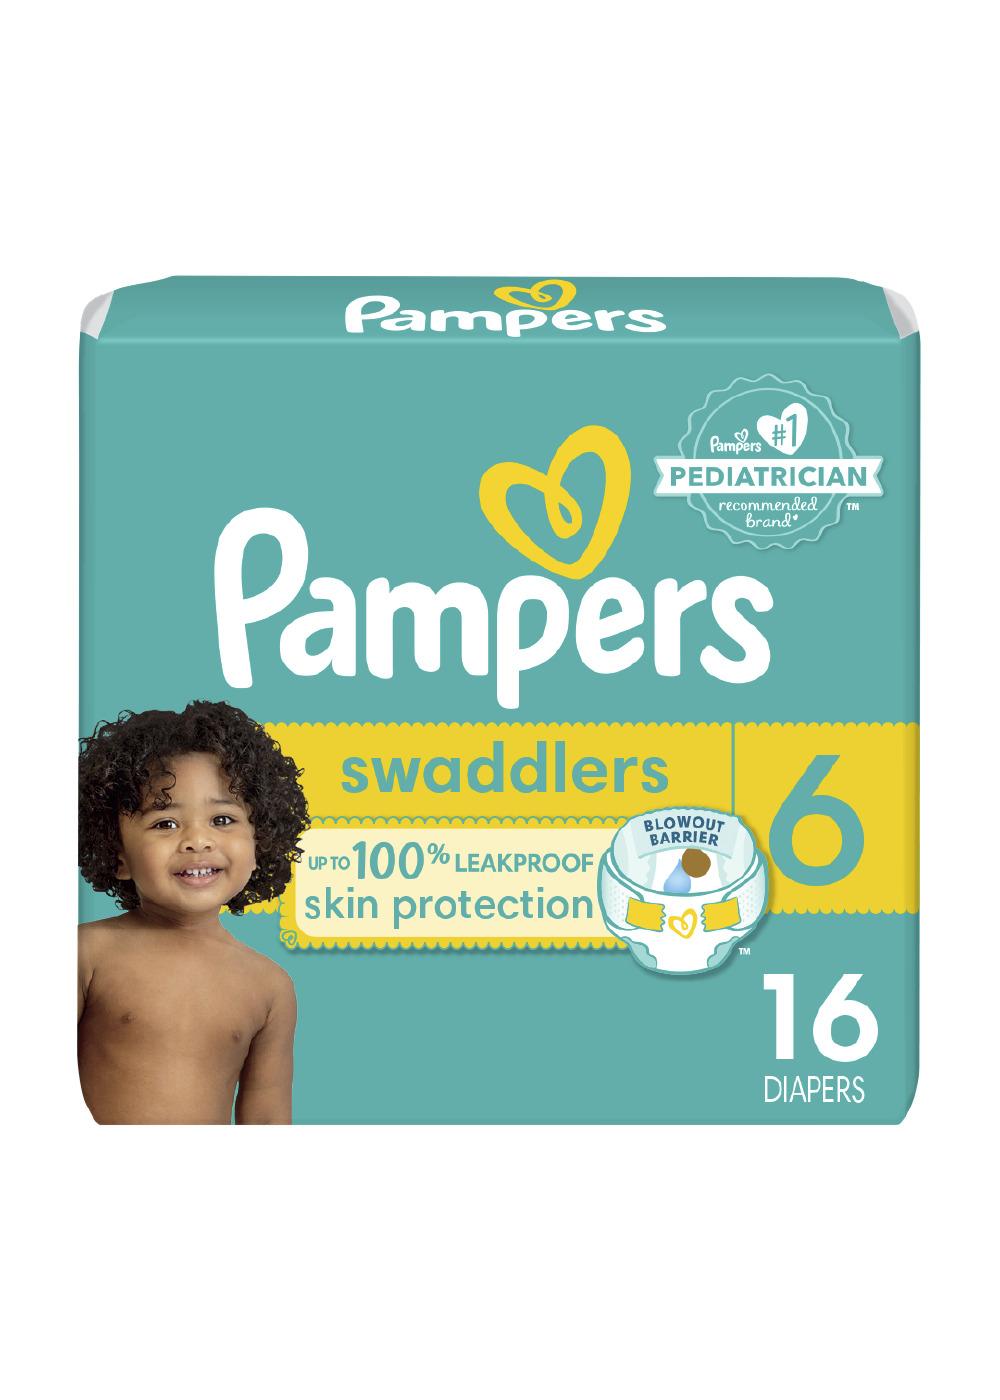 Pampers Swaddlers Baby Diapers - Size 6; image 1 of 10